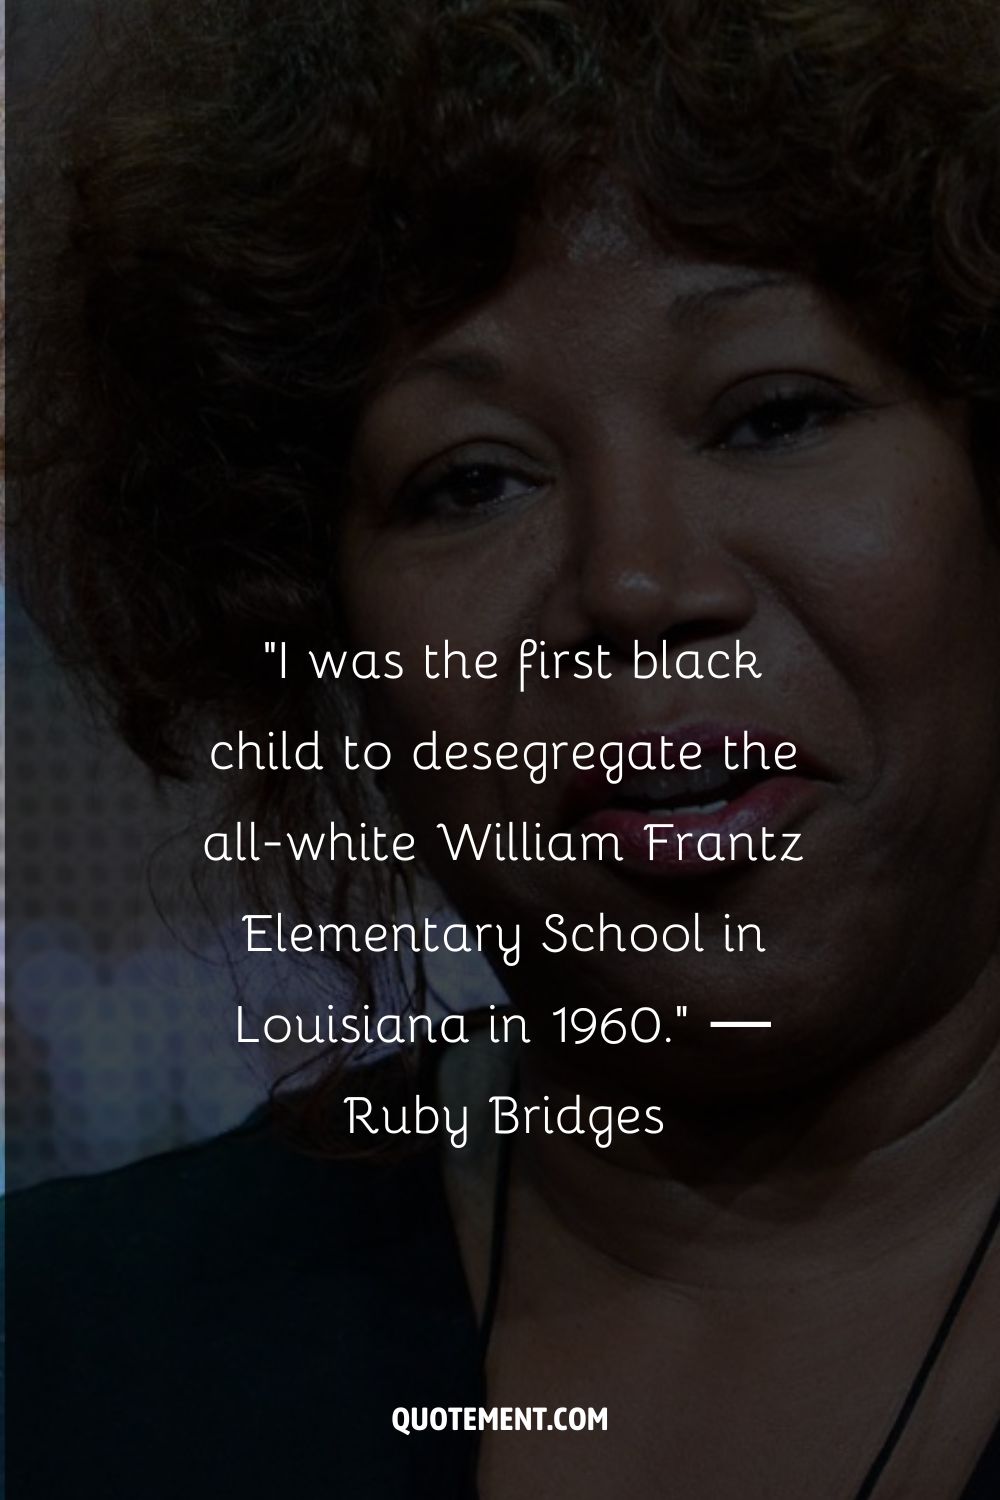 I was the first black child to desegregate the all-white William Frantz Elementary School